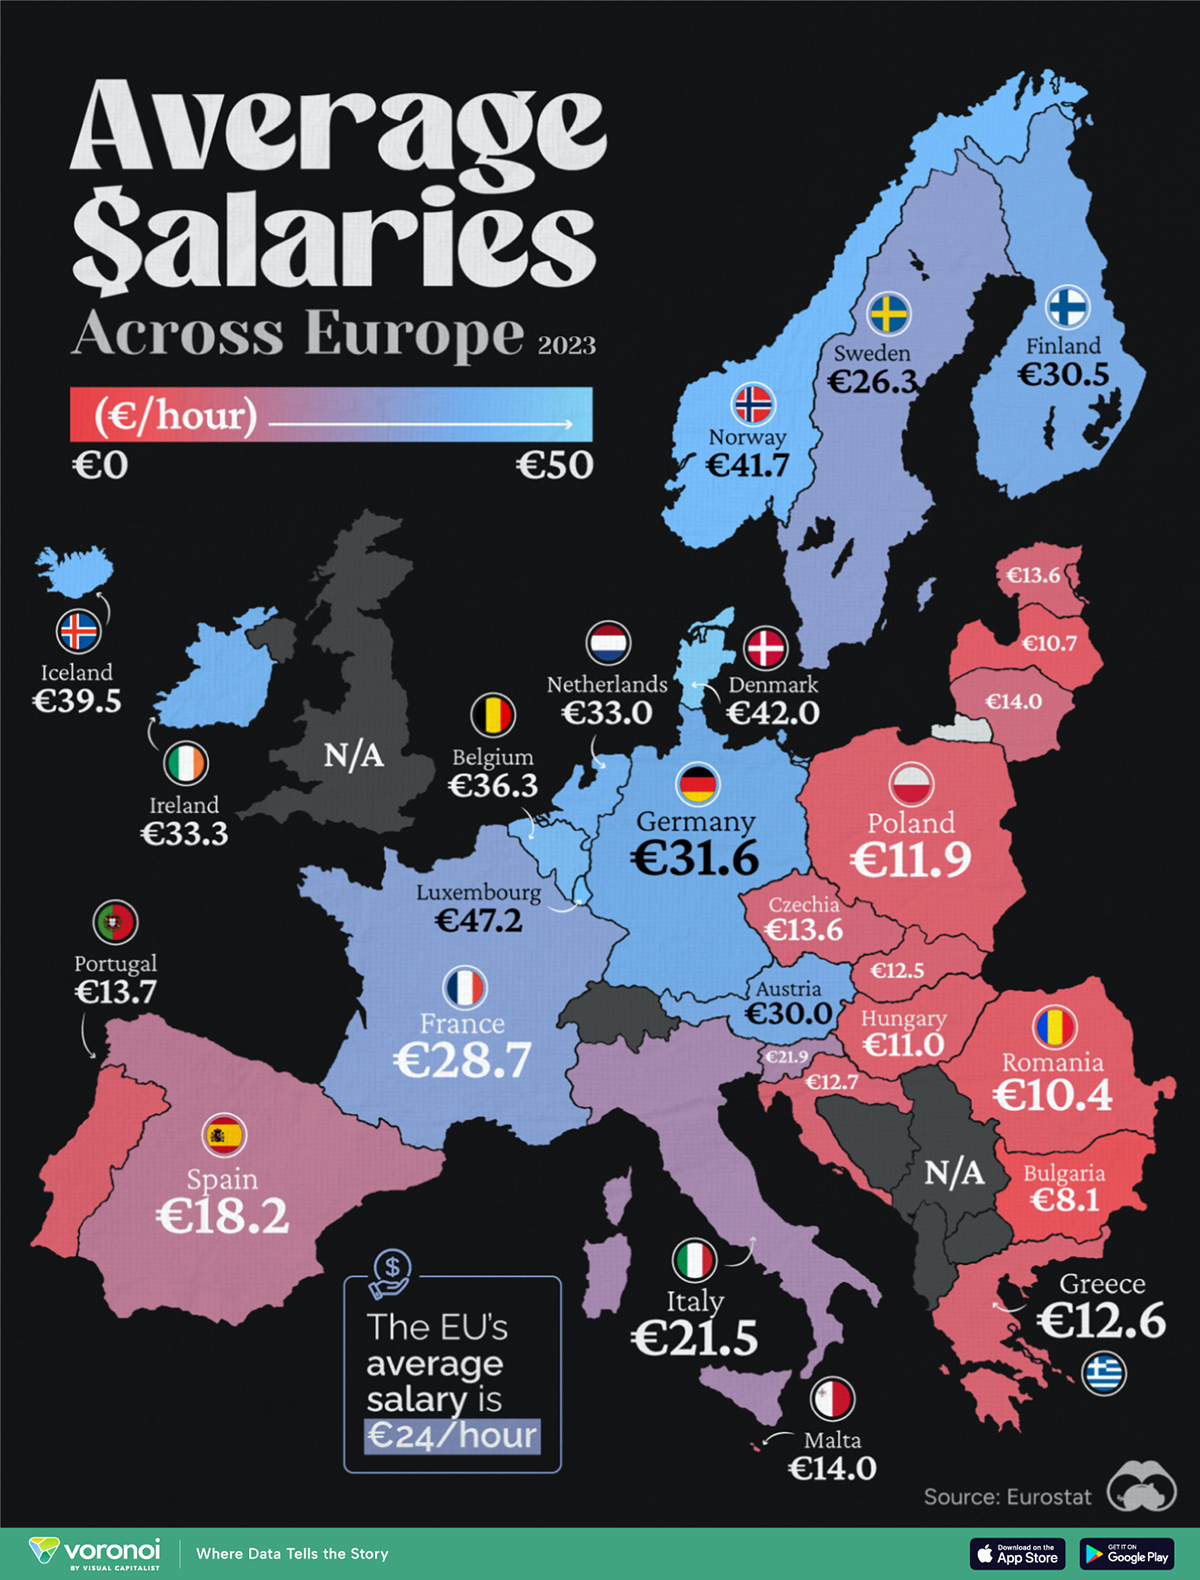 A heatmap representing the average salaries (in Euros per hour), across Europe.